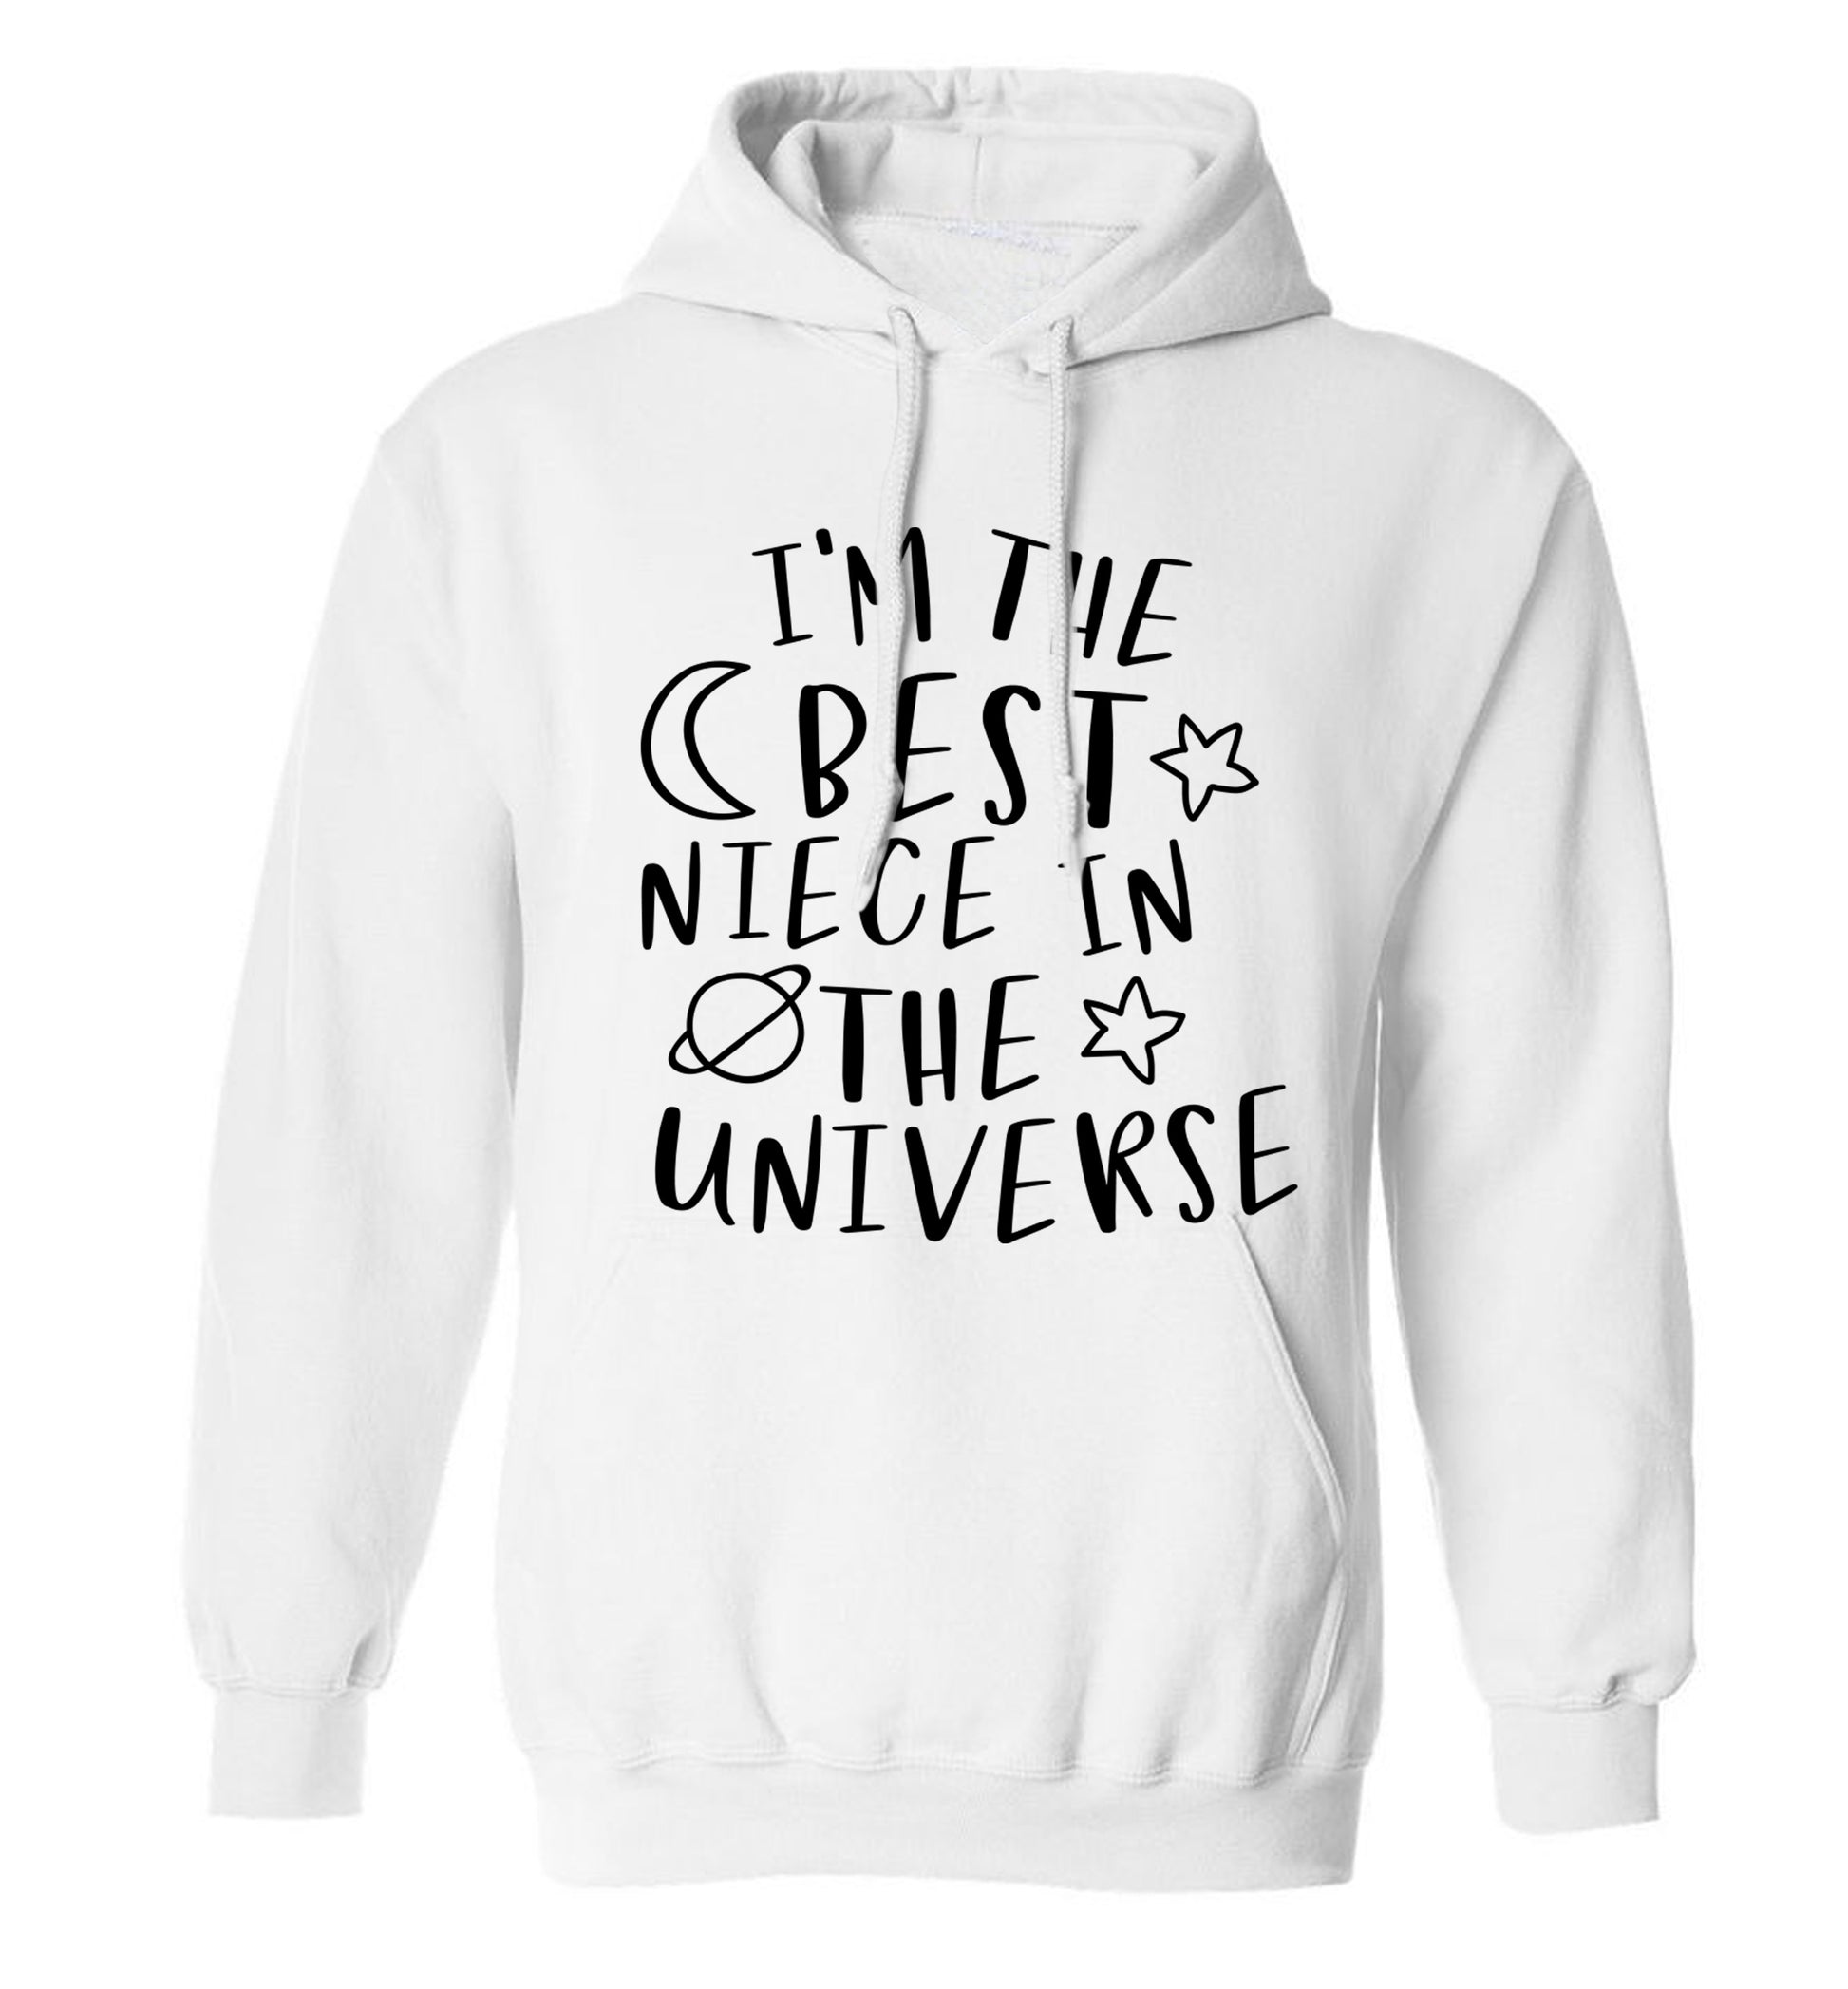 I'm the best niece in the universe adults unisex white hoodie 2XL